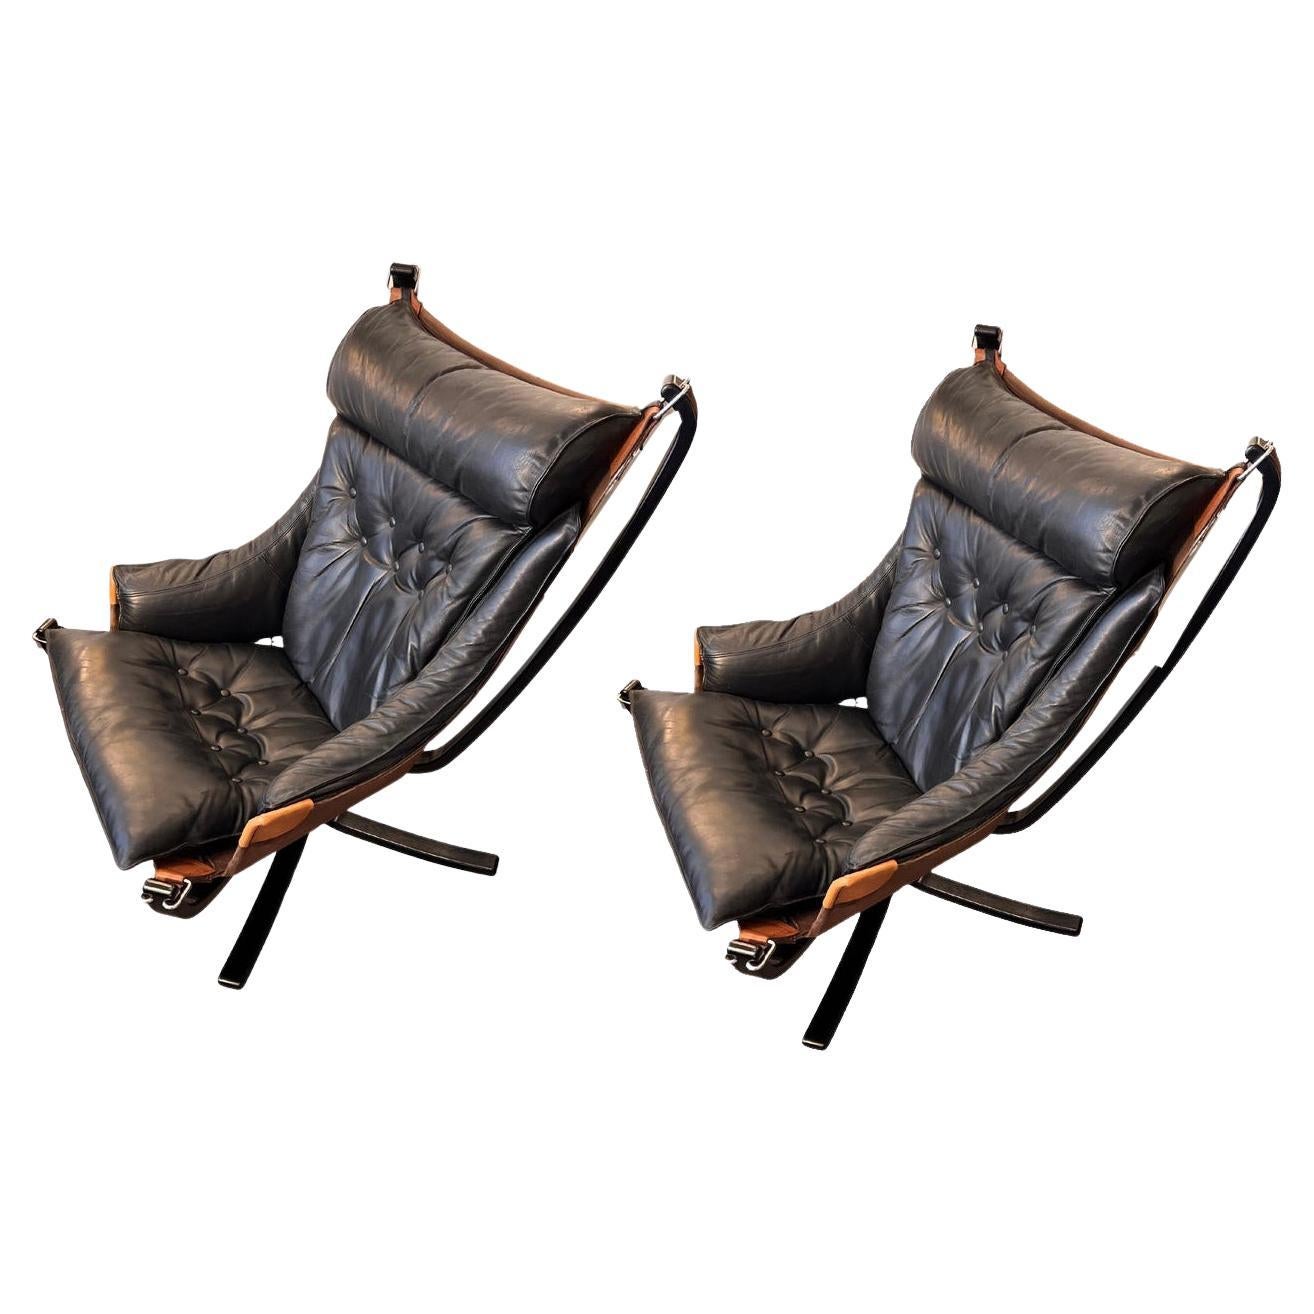 Pair of Armchairs by Poltrona Frau 1960s, "Falcon" Model